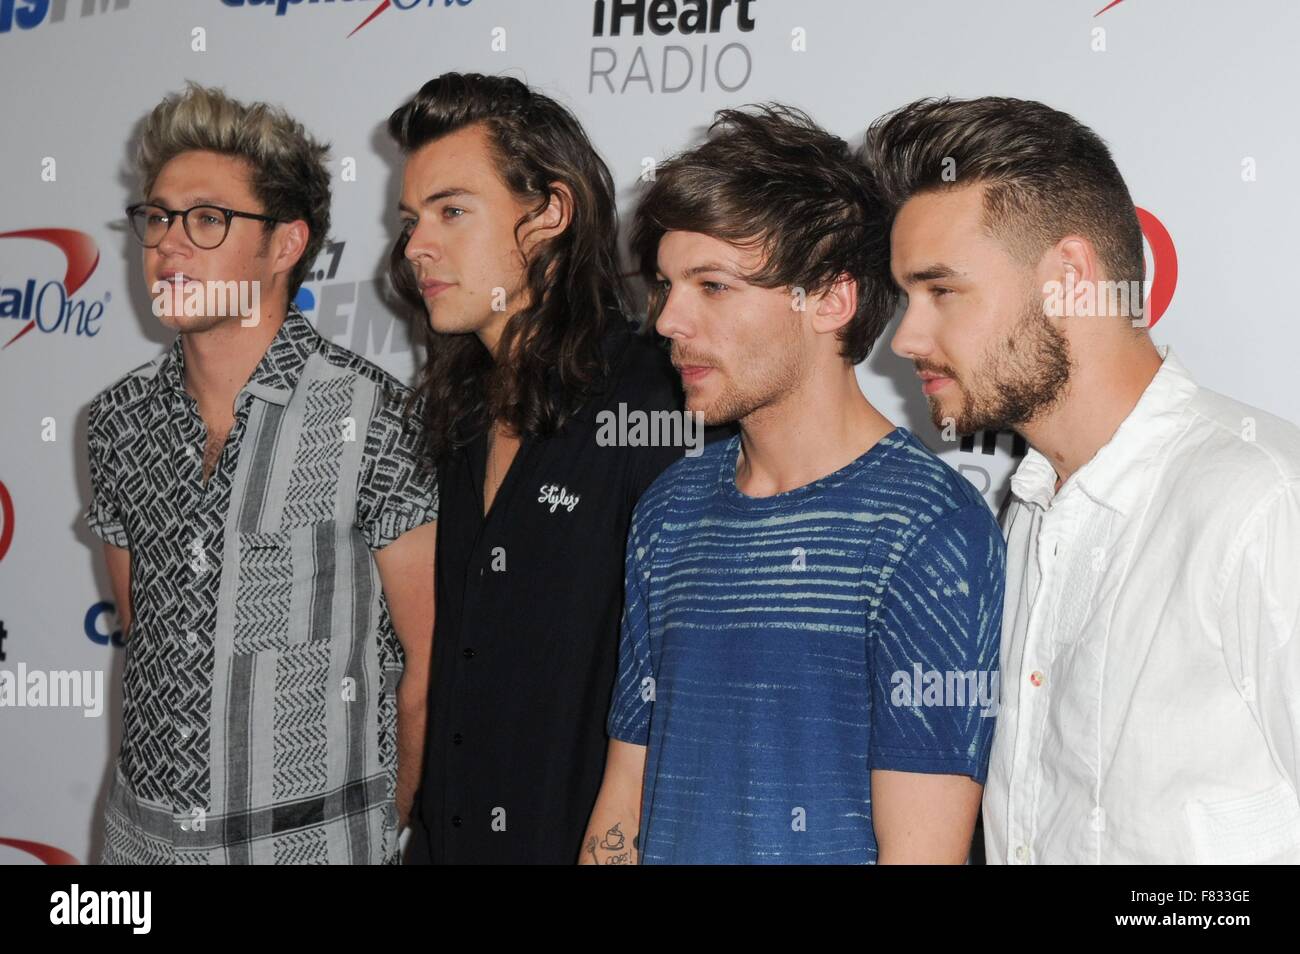 one direction, louis tomlinson and harry styles - image #6945073